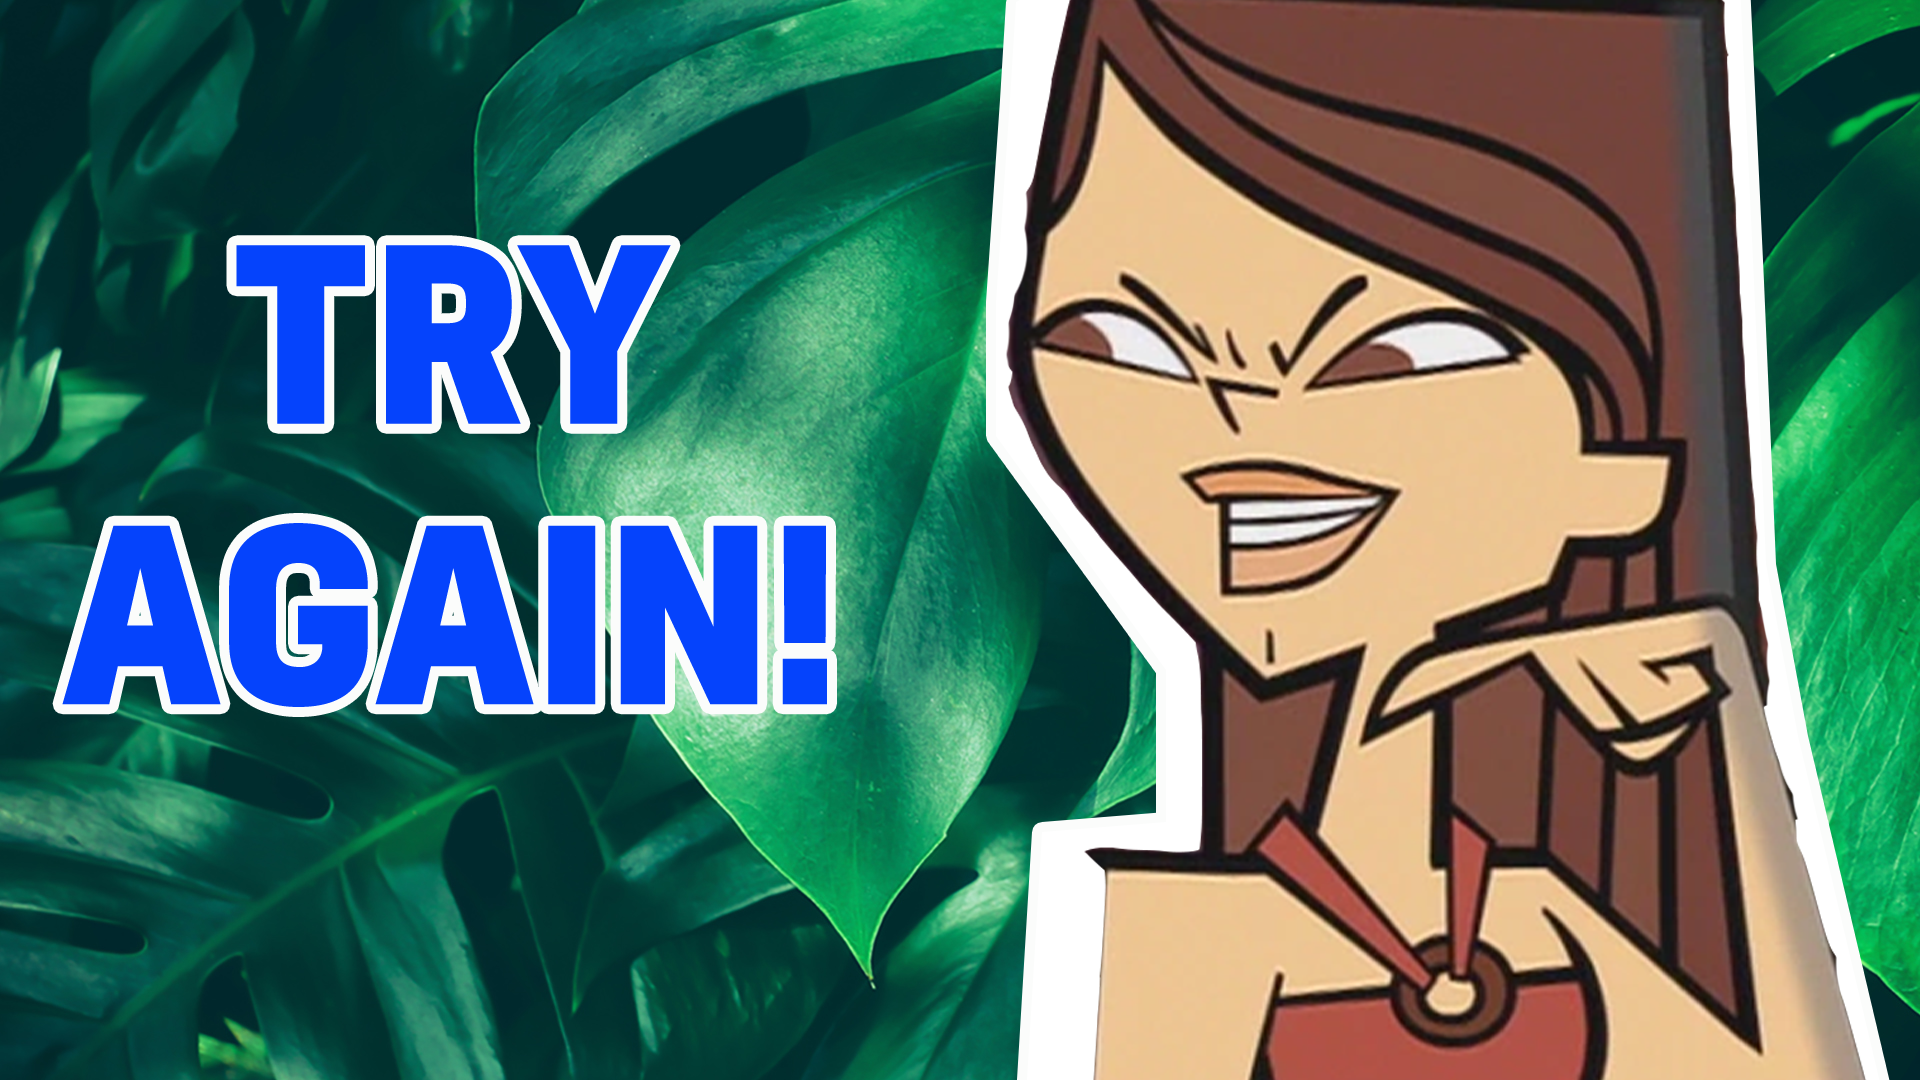 Hmm, well you know a little bit about Total Drama Island, but not enough to win the prize! Try again!